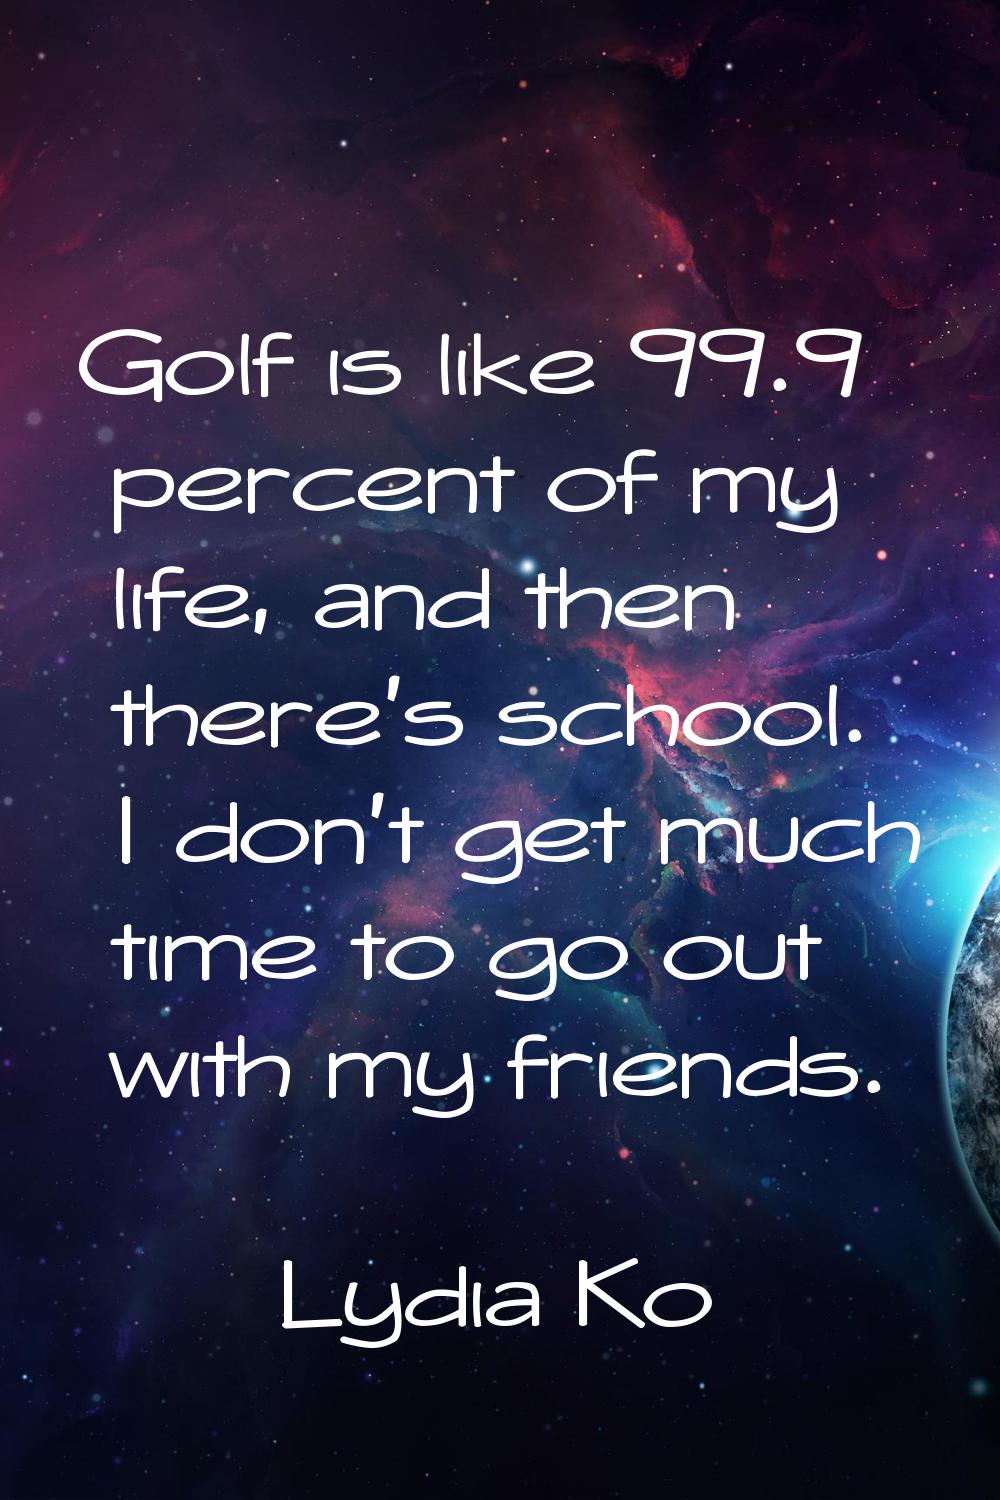 Golf is like 99.9 percent of my life, and then there's school. I don't get much time to go out with